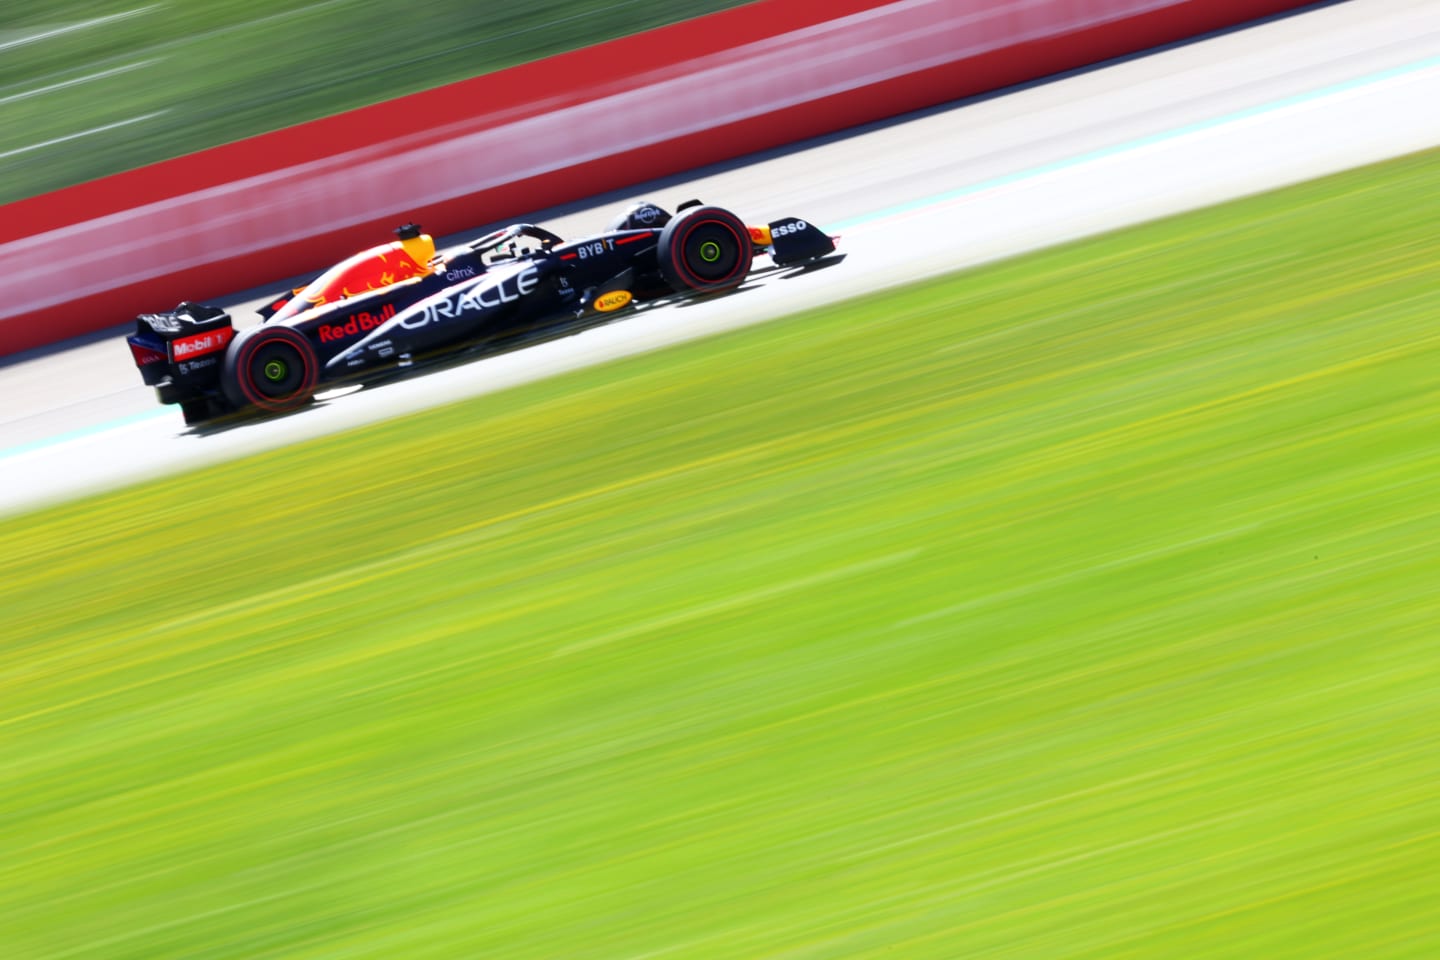 SPIELBERG, AUSTRIA - JULY 08: Max Verstappen of the Netherlands driving the (1) Oracle Red Bull